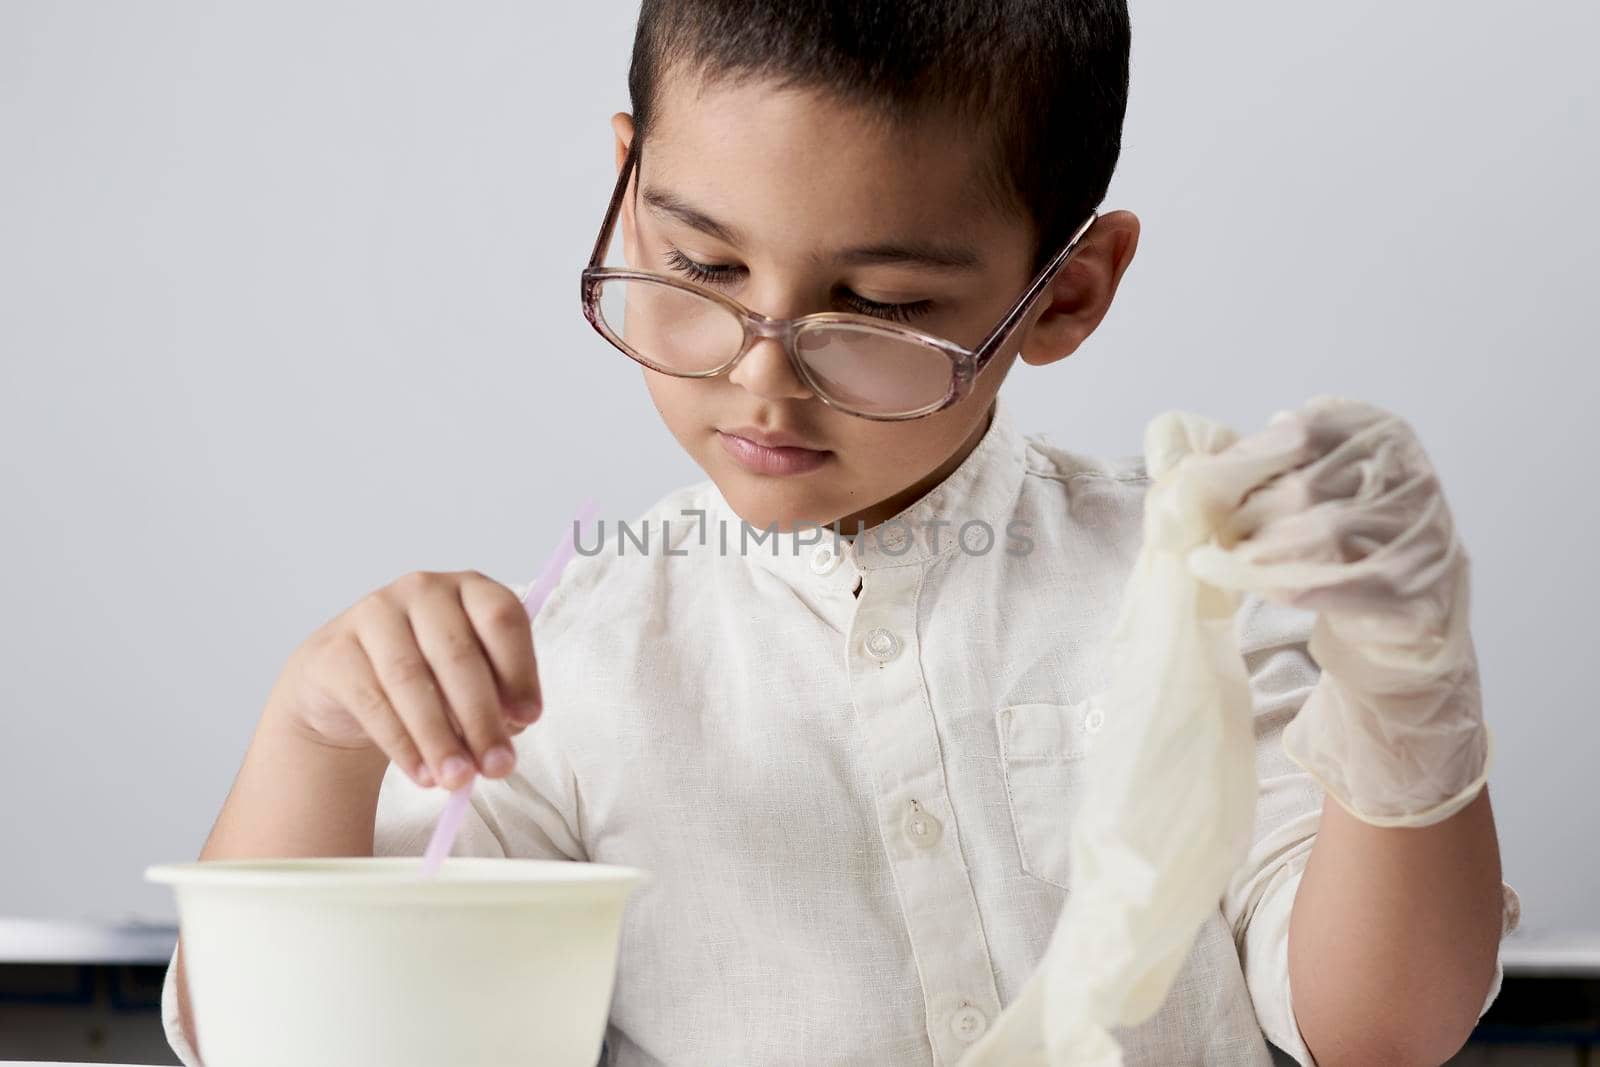 Portrait of a cute kid in eyeglasses experimenting with liquids against the white background